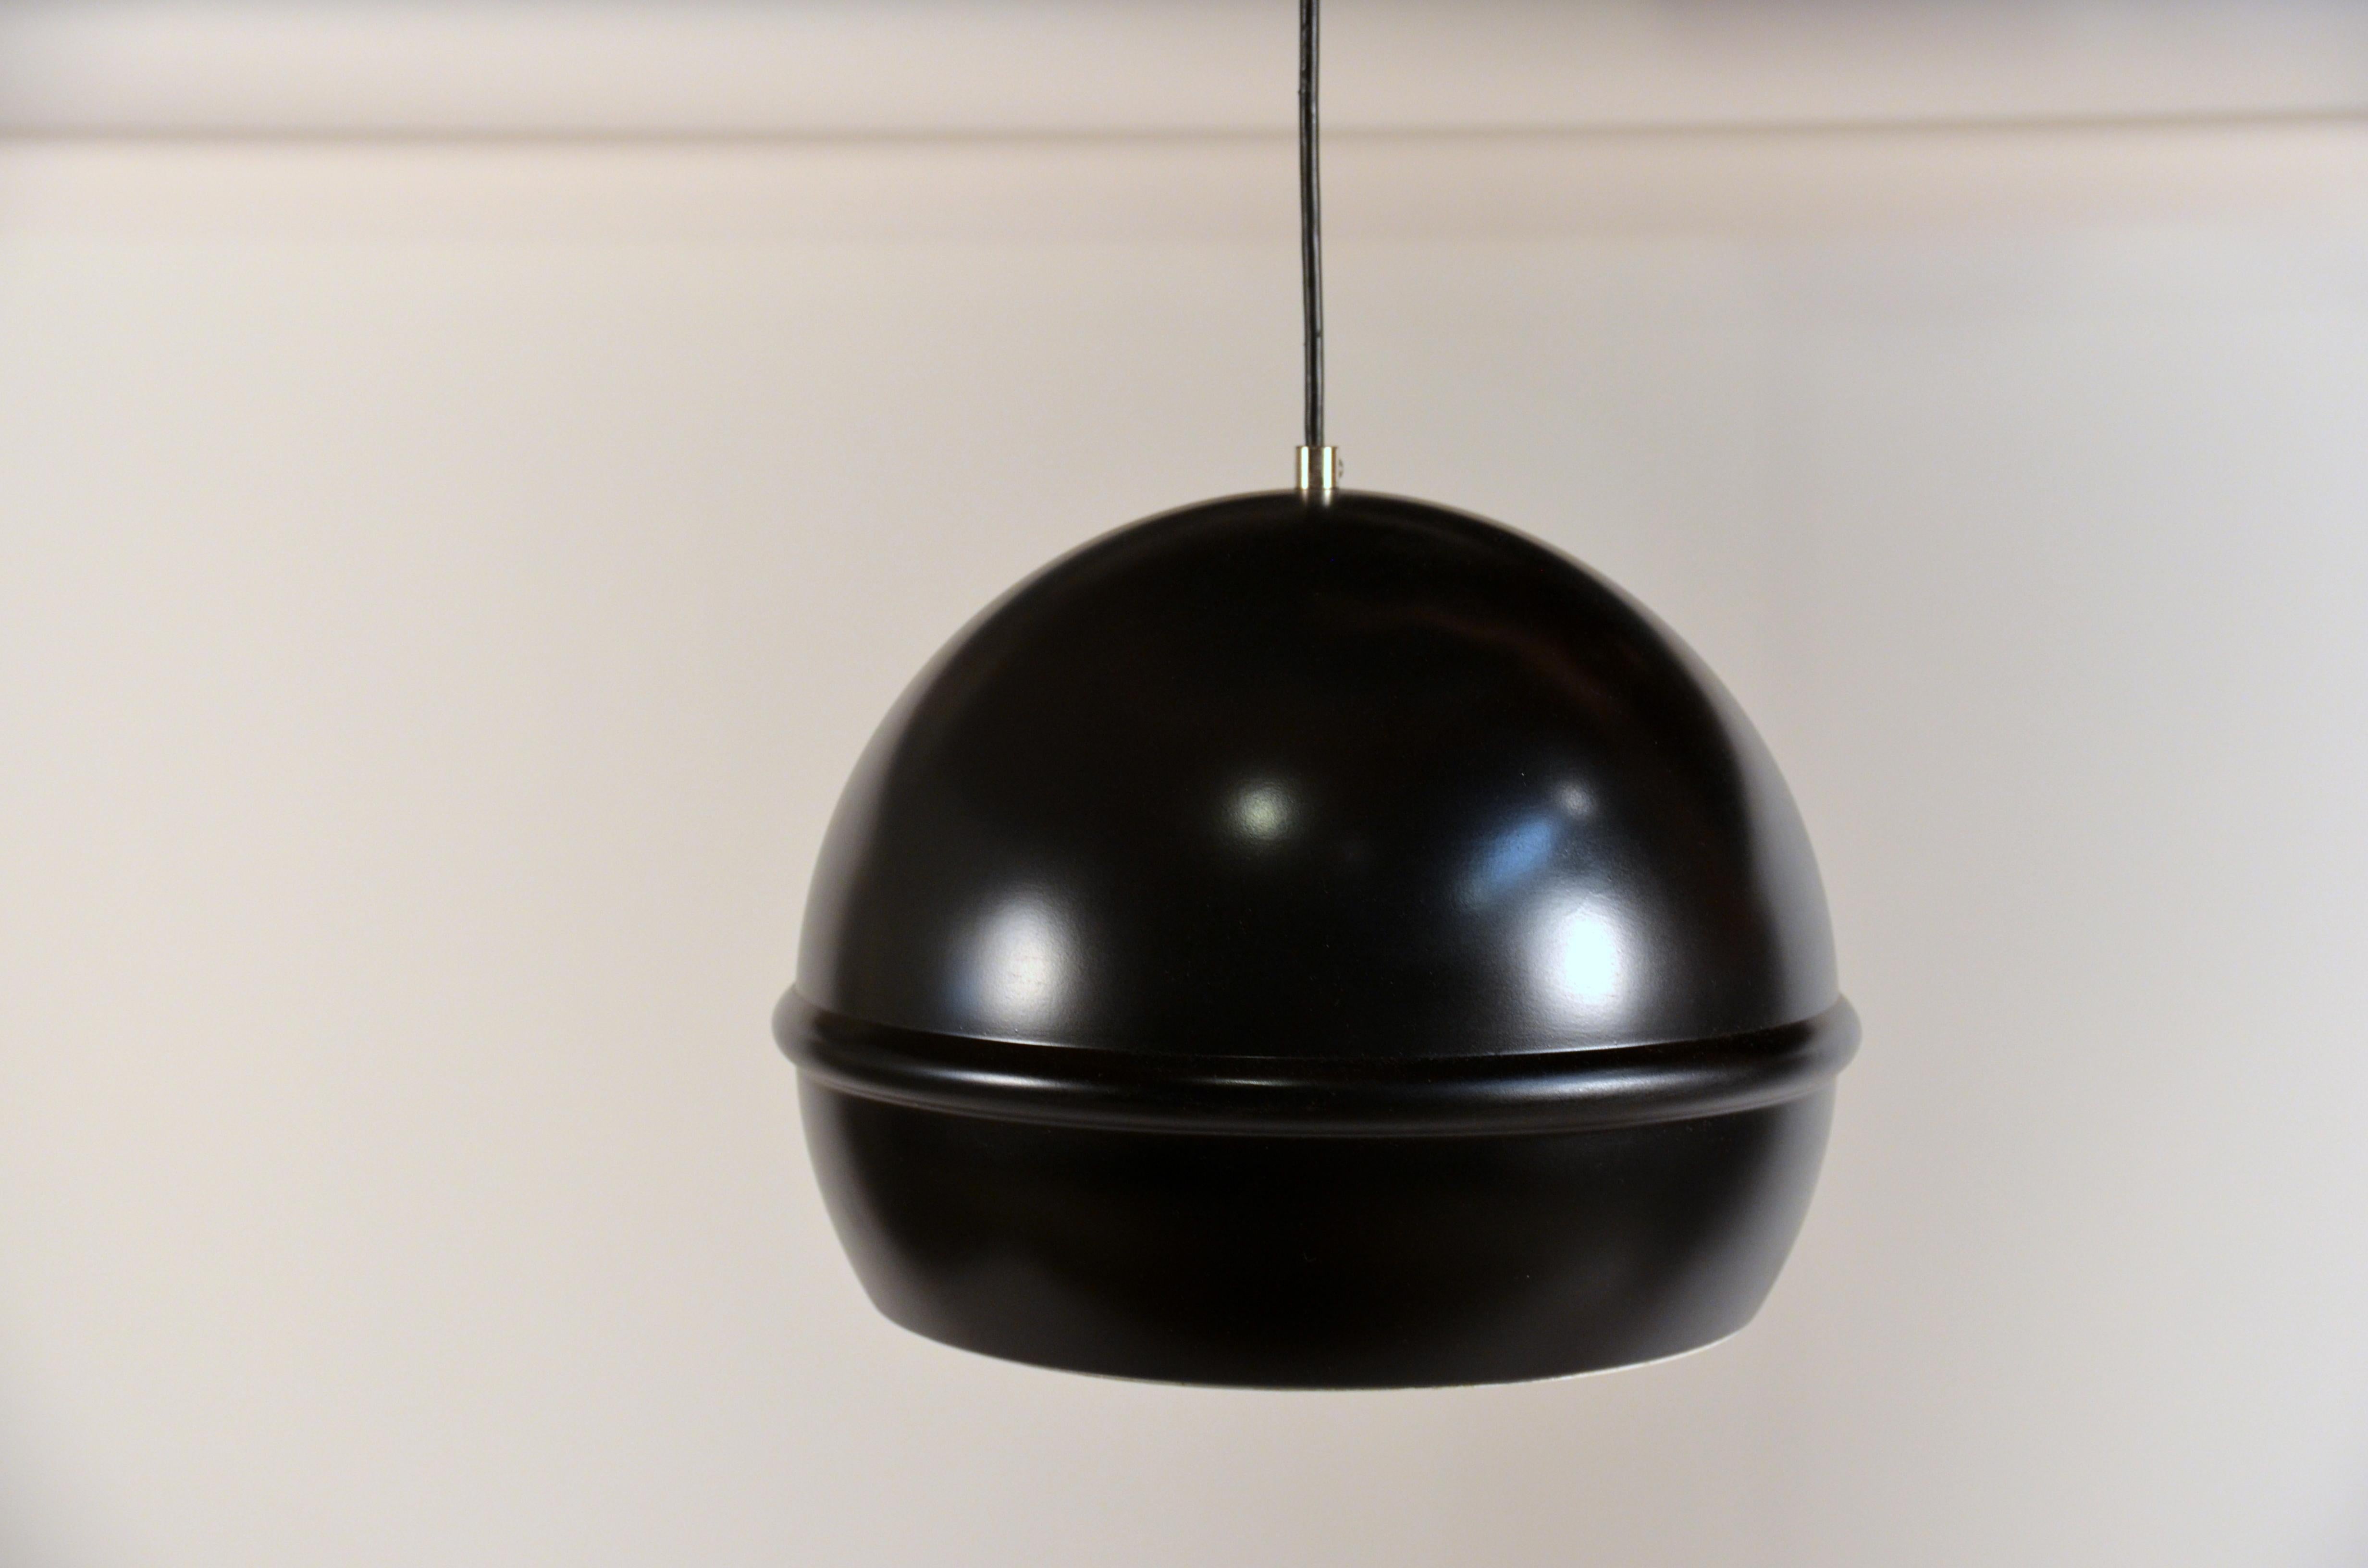 Set of 7 French 1960s black globe pendants. Matching canopies.

Can be installed aligned, in a grid, or in a cluster at different heights.

Perfect with silver- or gold-tipped bulbs.

Priced as a set of 7 but can also be sold individually; please